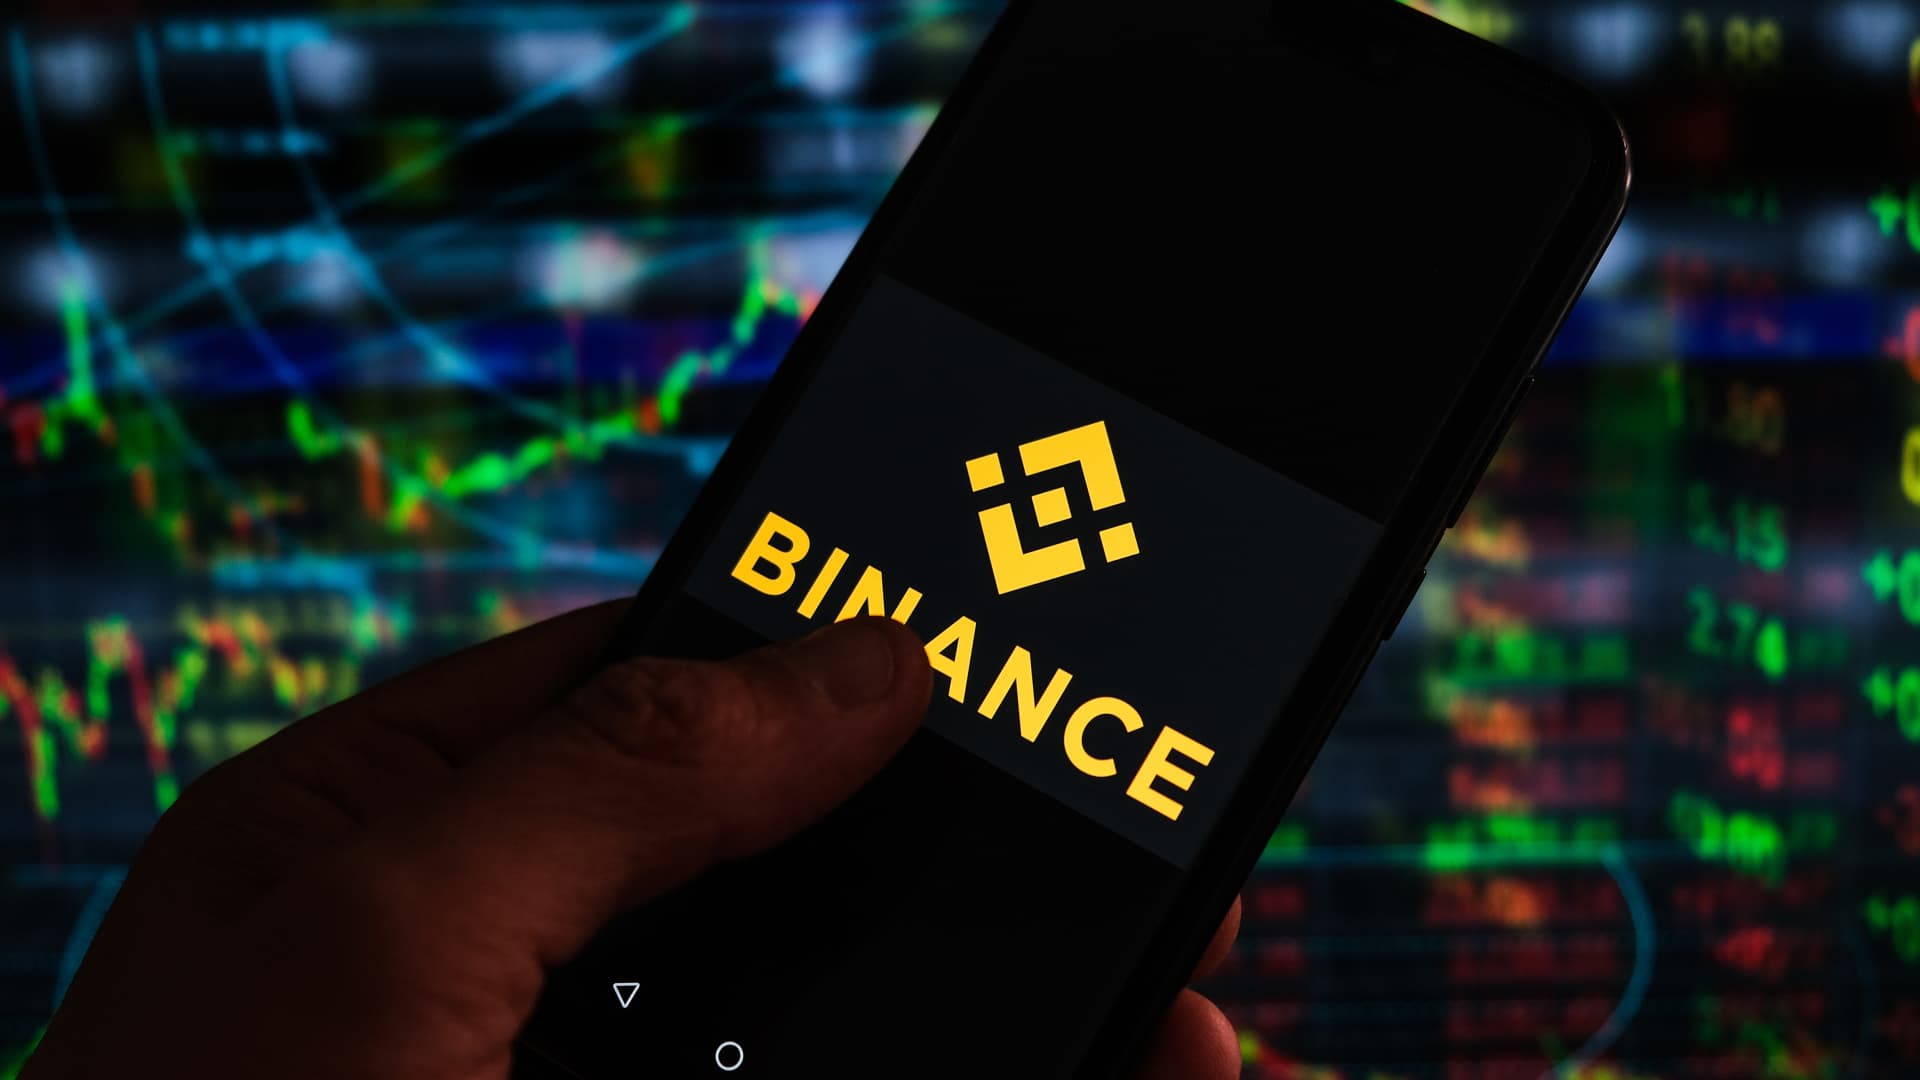 Crypto exchange Binance fined $3.4 million by Dutch central bank for operating illegally